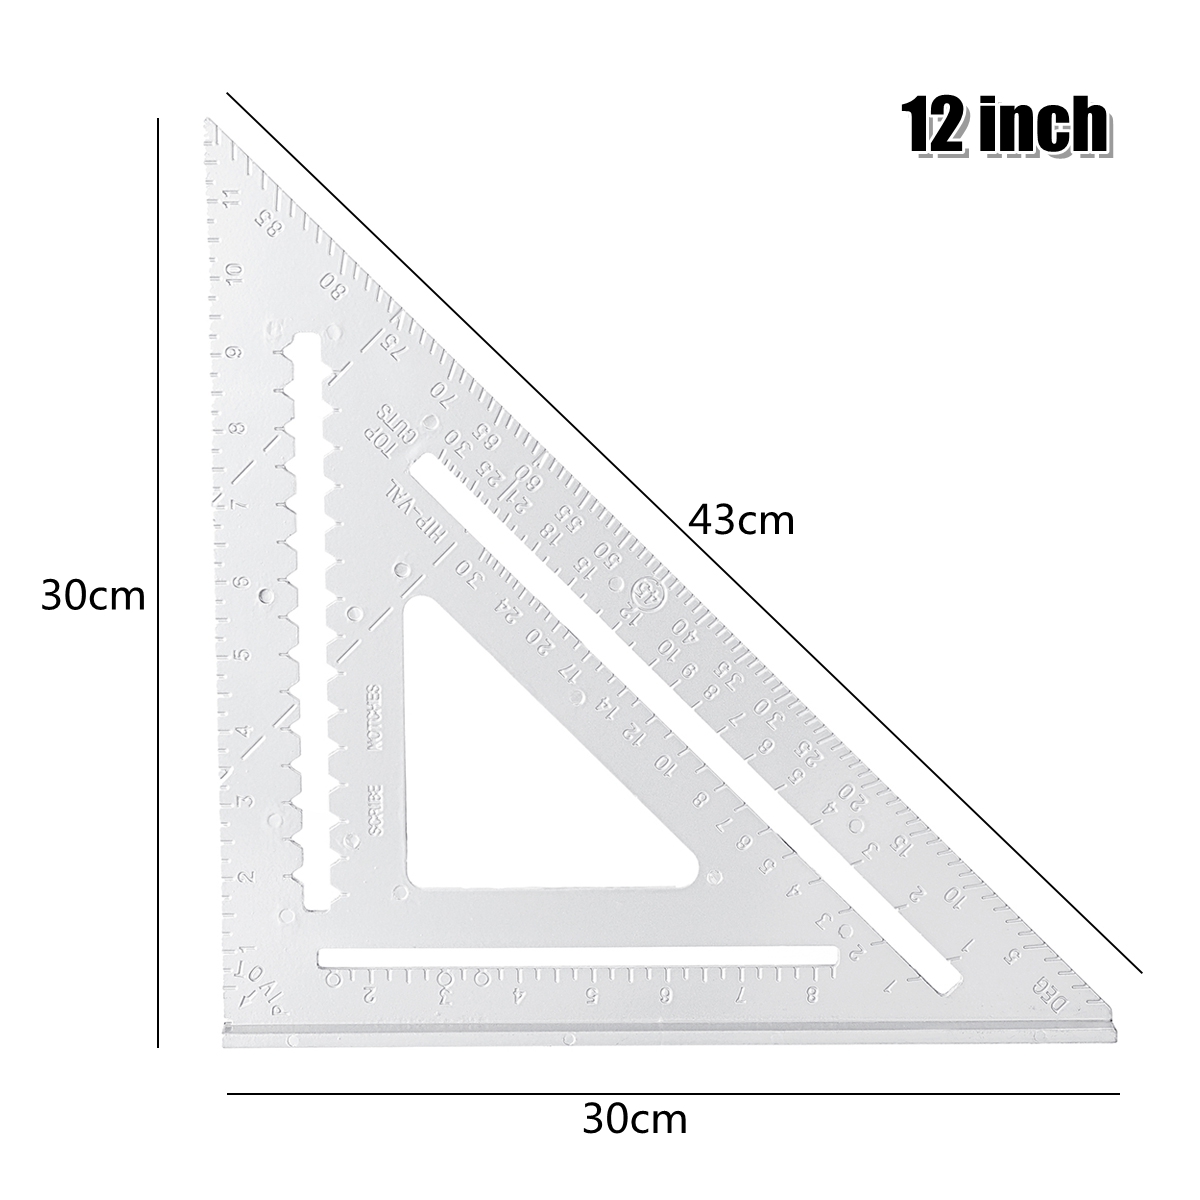 Aluminum-Alloy-Angle-Square-Triangle-Ruler-Roofing-Carpenter-Woodworking-Tool-1779182-7